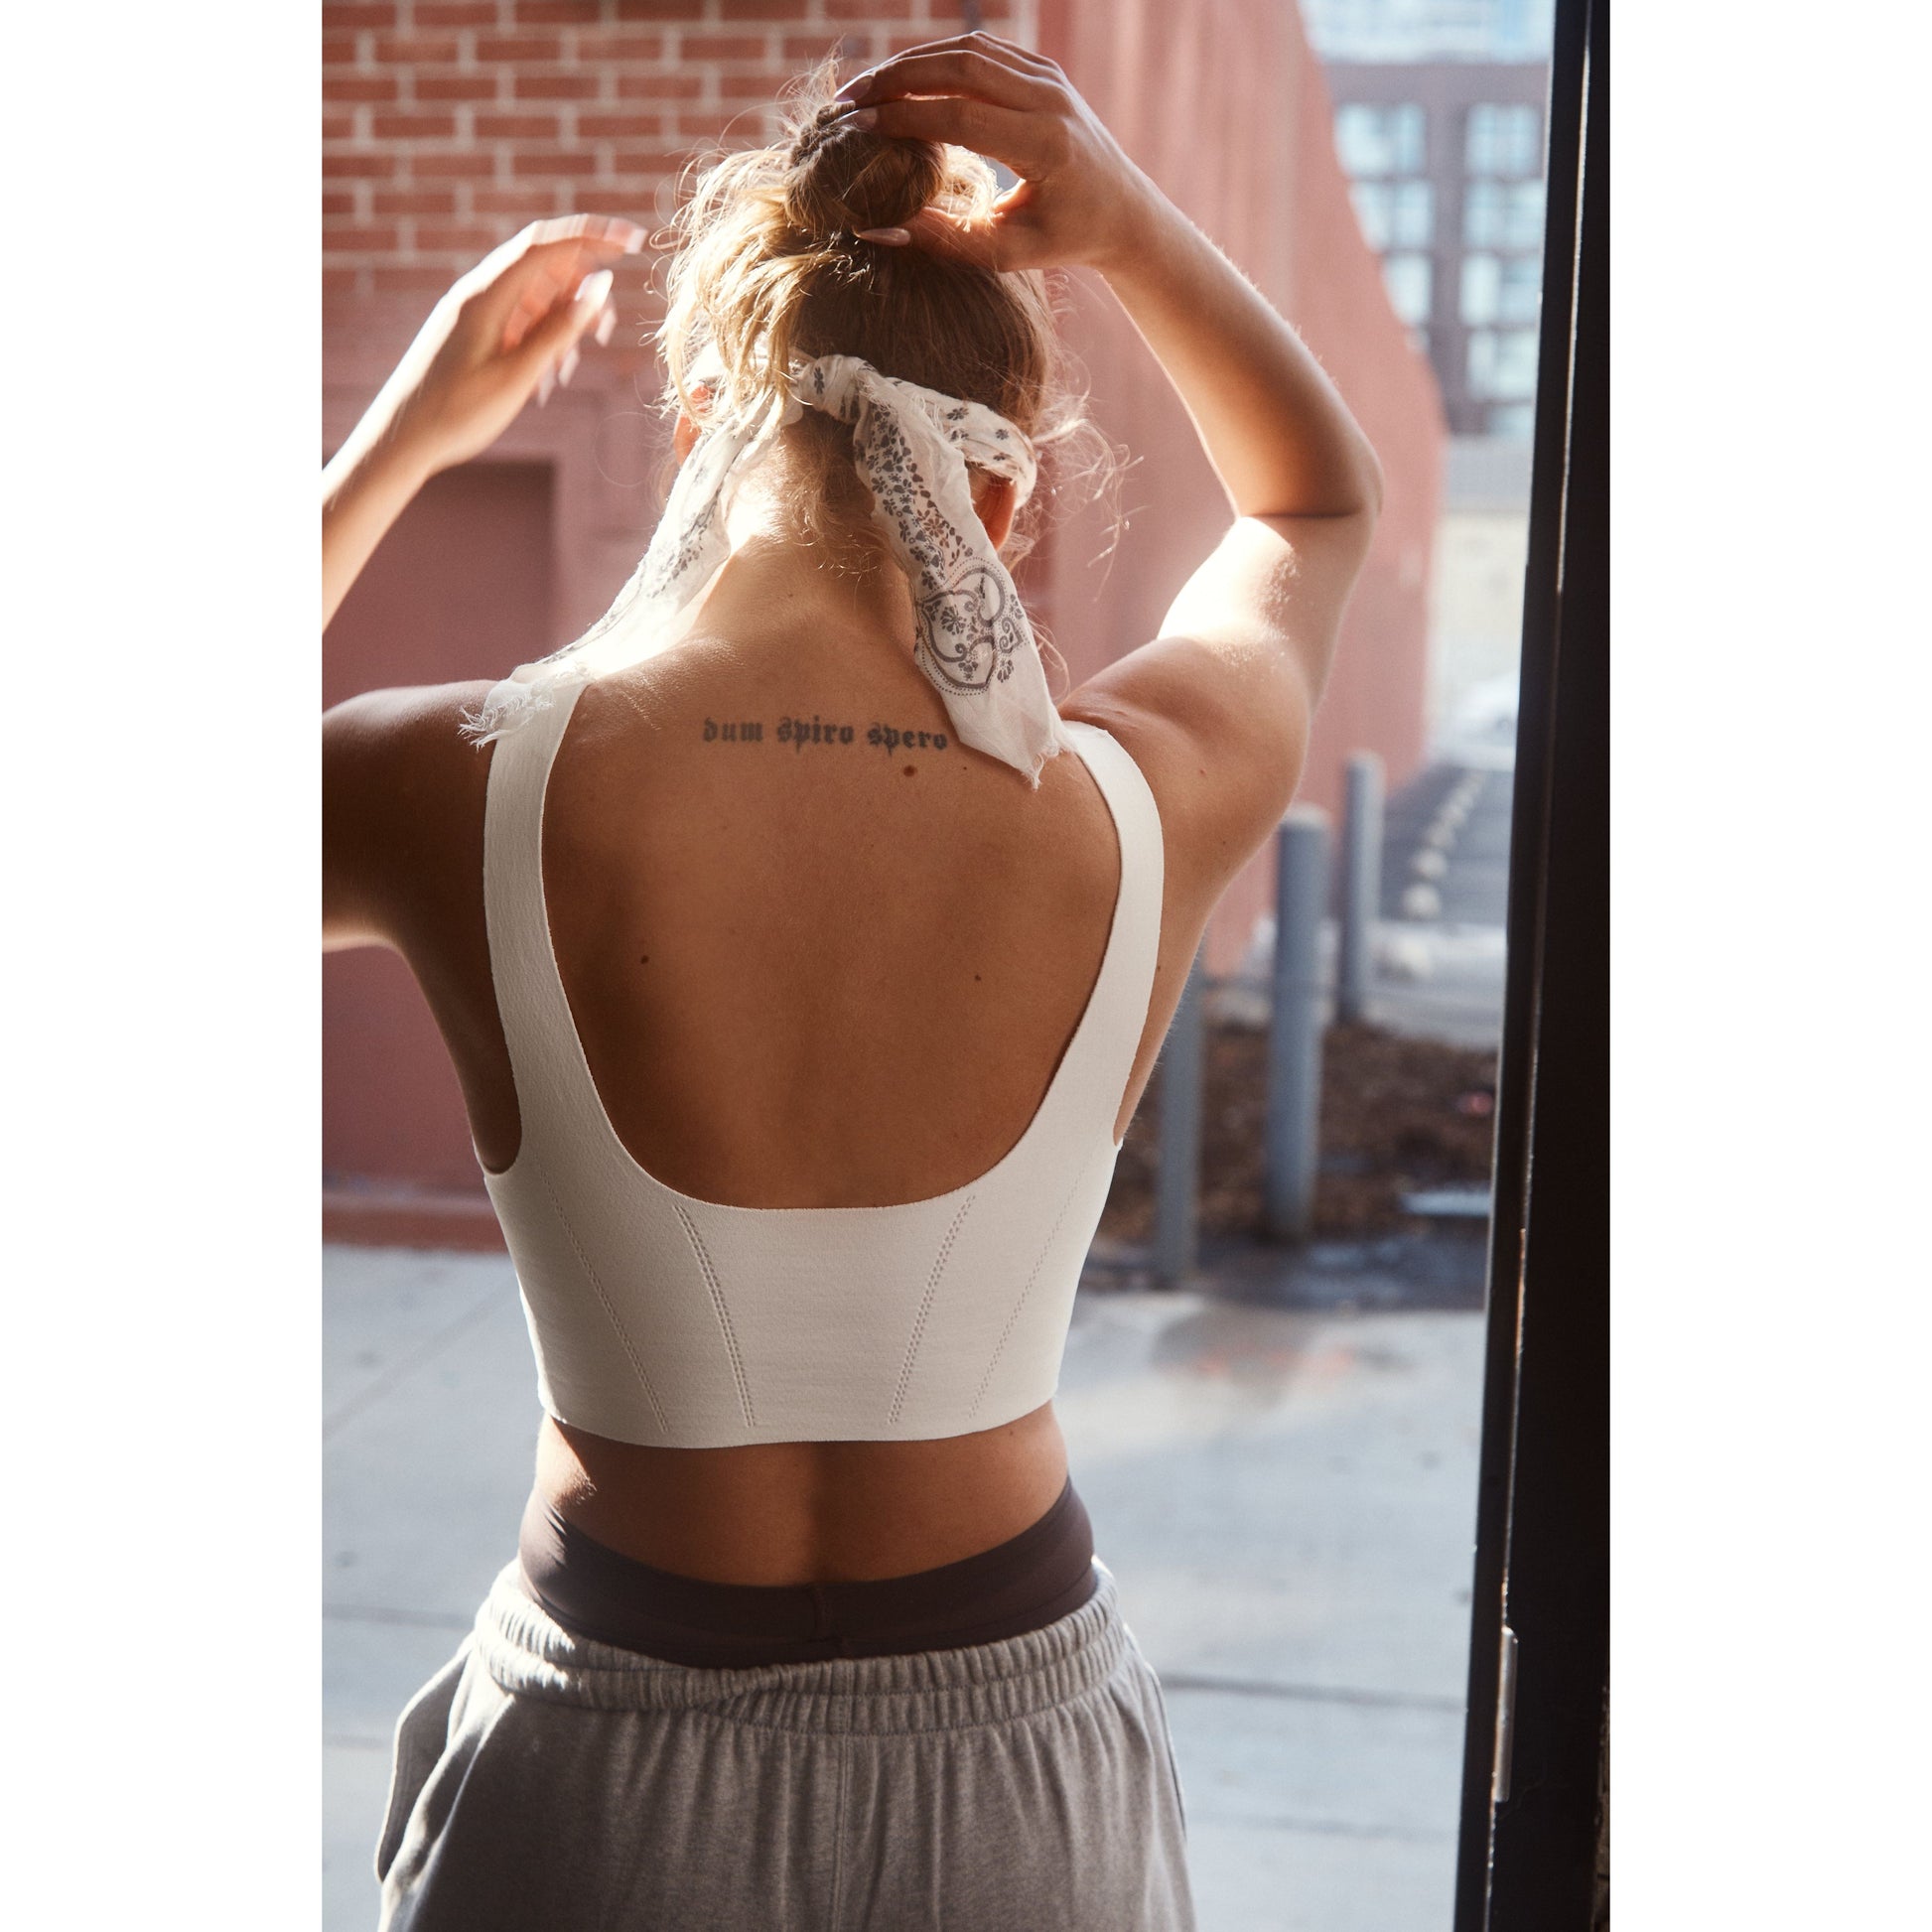 Woman tying her hair, viewed from behind, with a tattoo reading "dum spiro spero" on her upper back. She wears a Free People Movement Stong Core Corset Cami in White and gray pants.